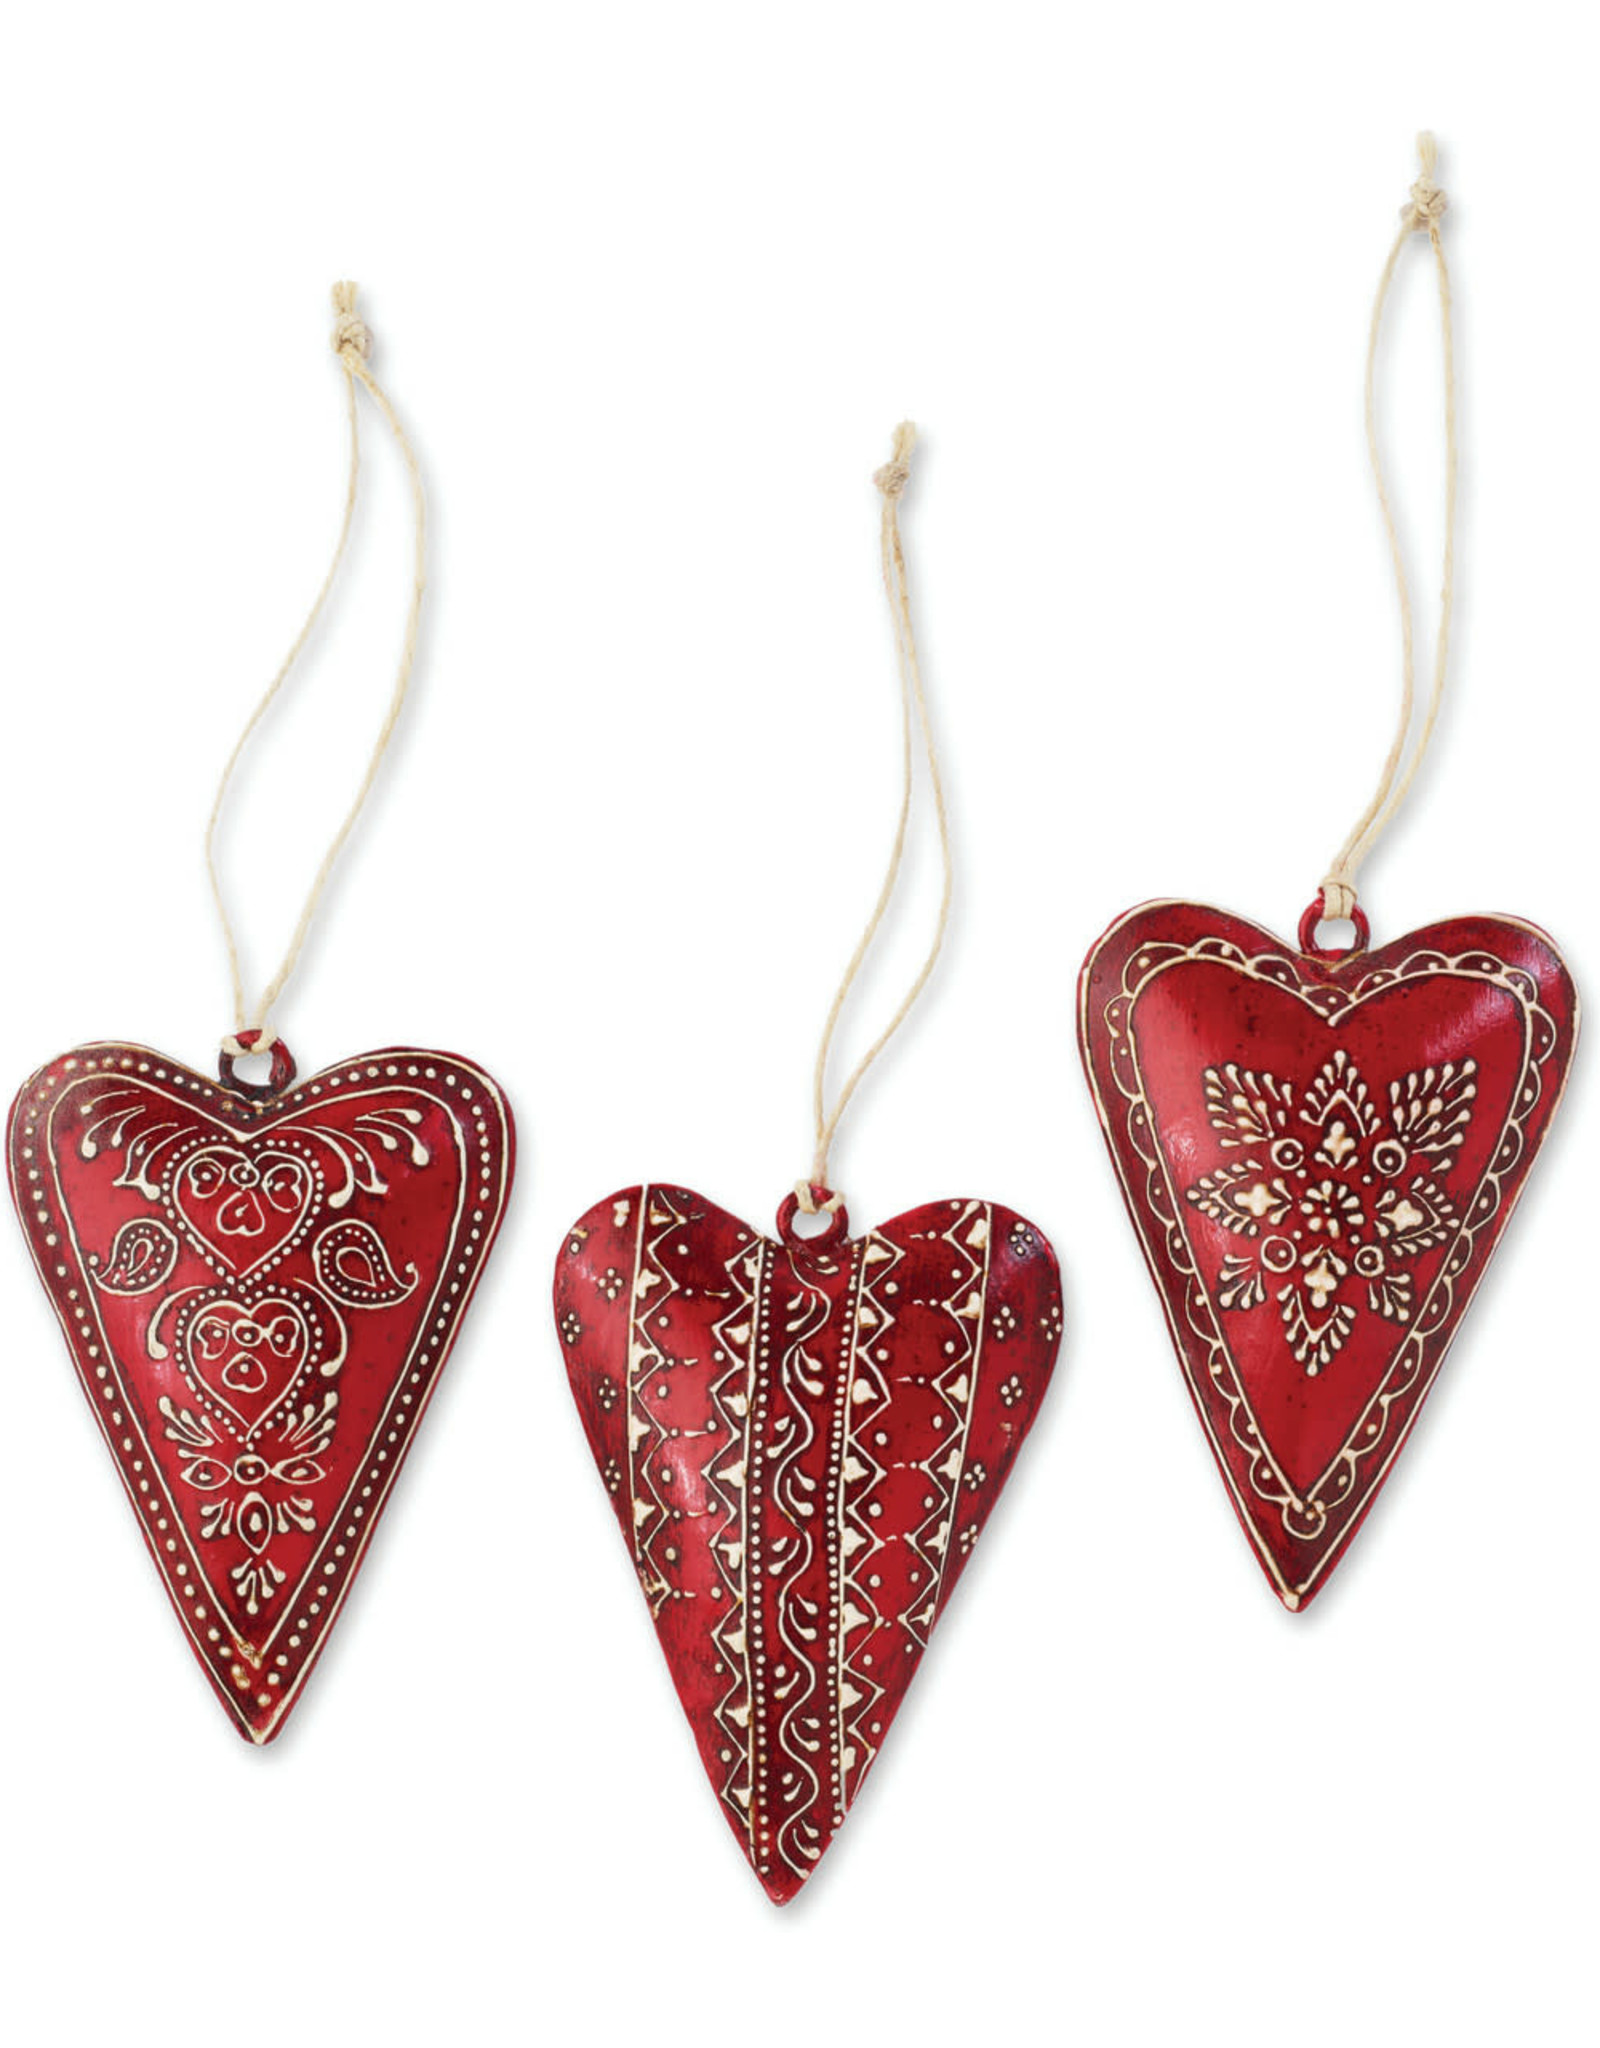 Demdaco Small Metal Red Heart Ornaments - Assorted